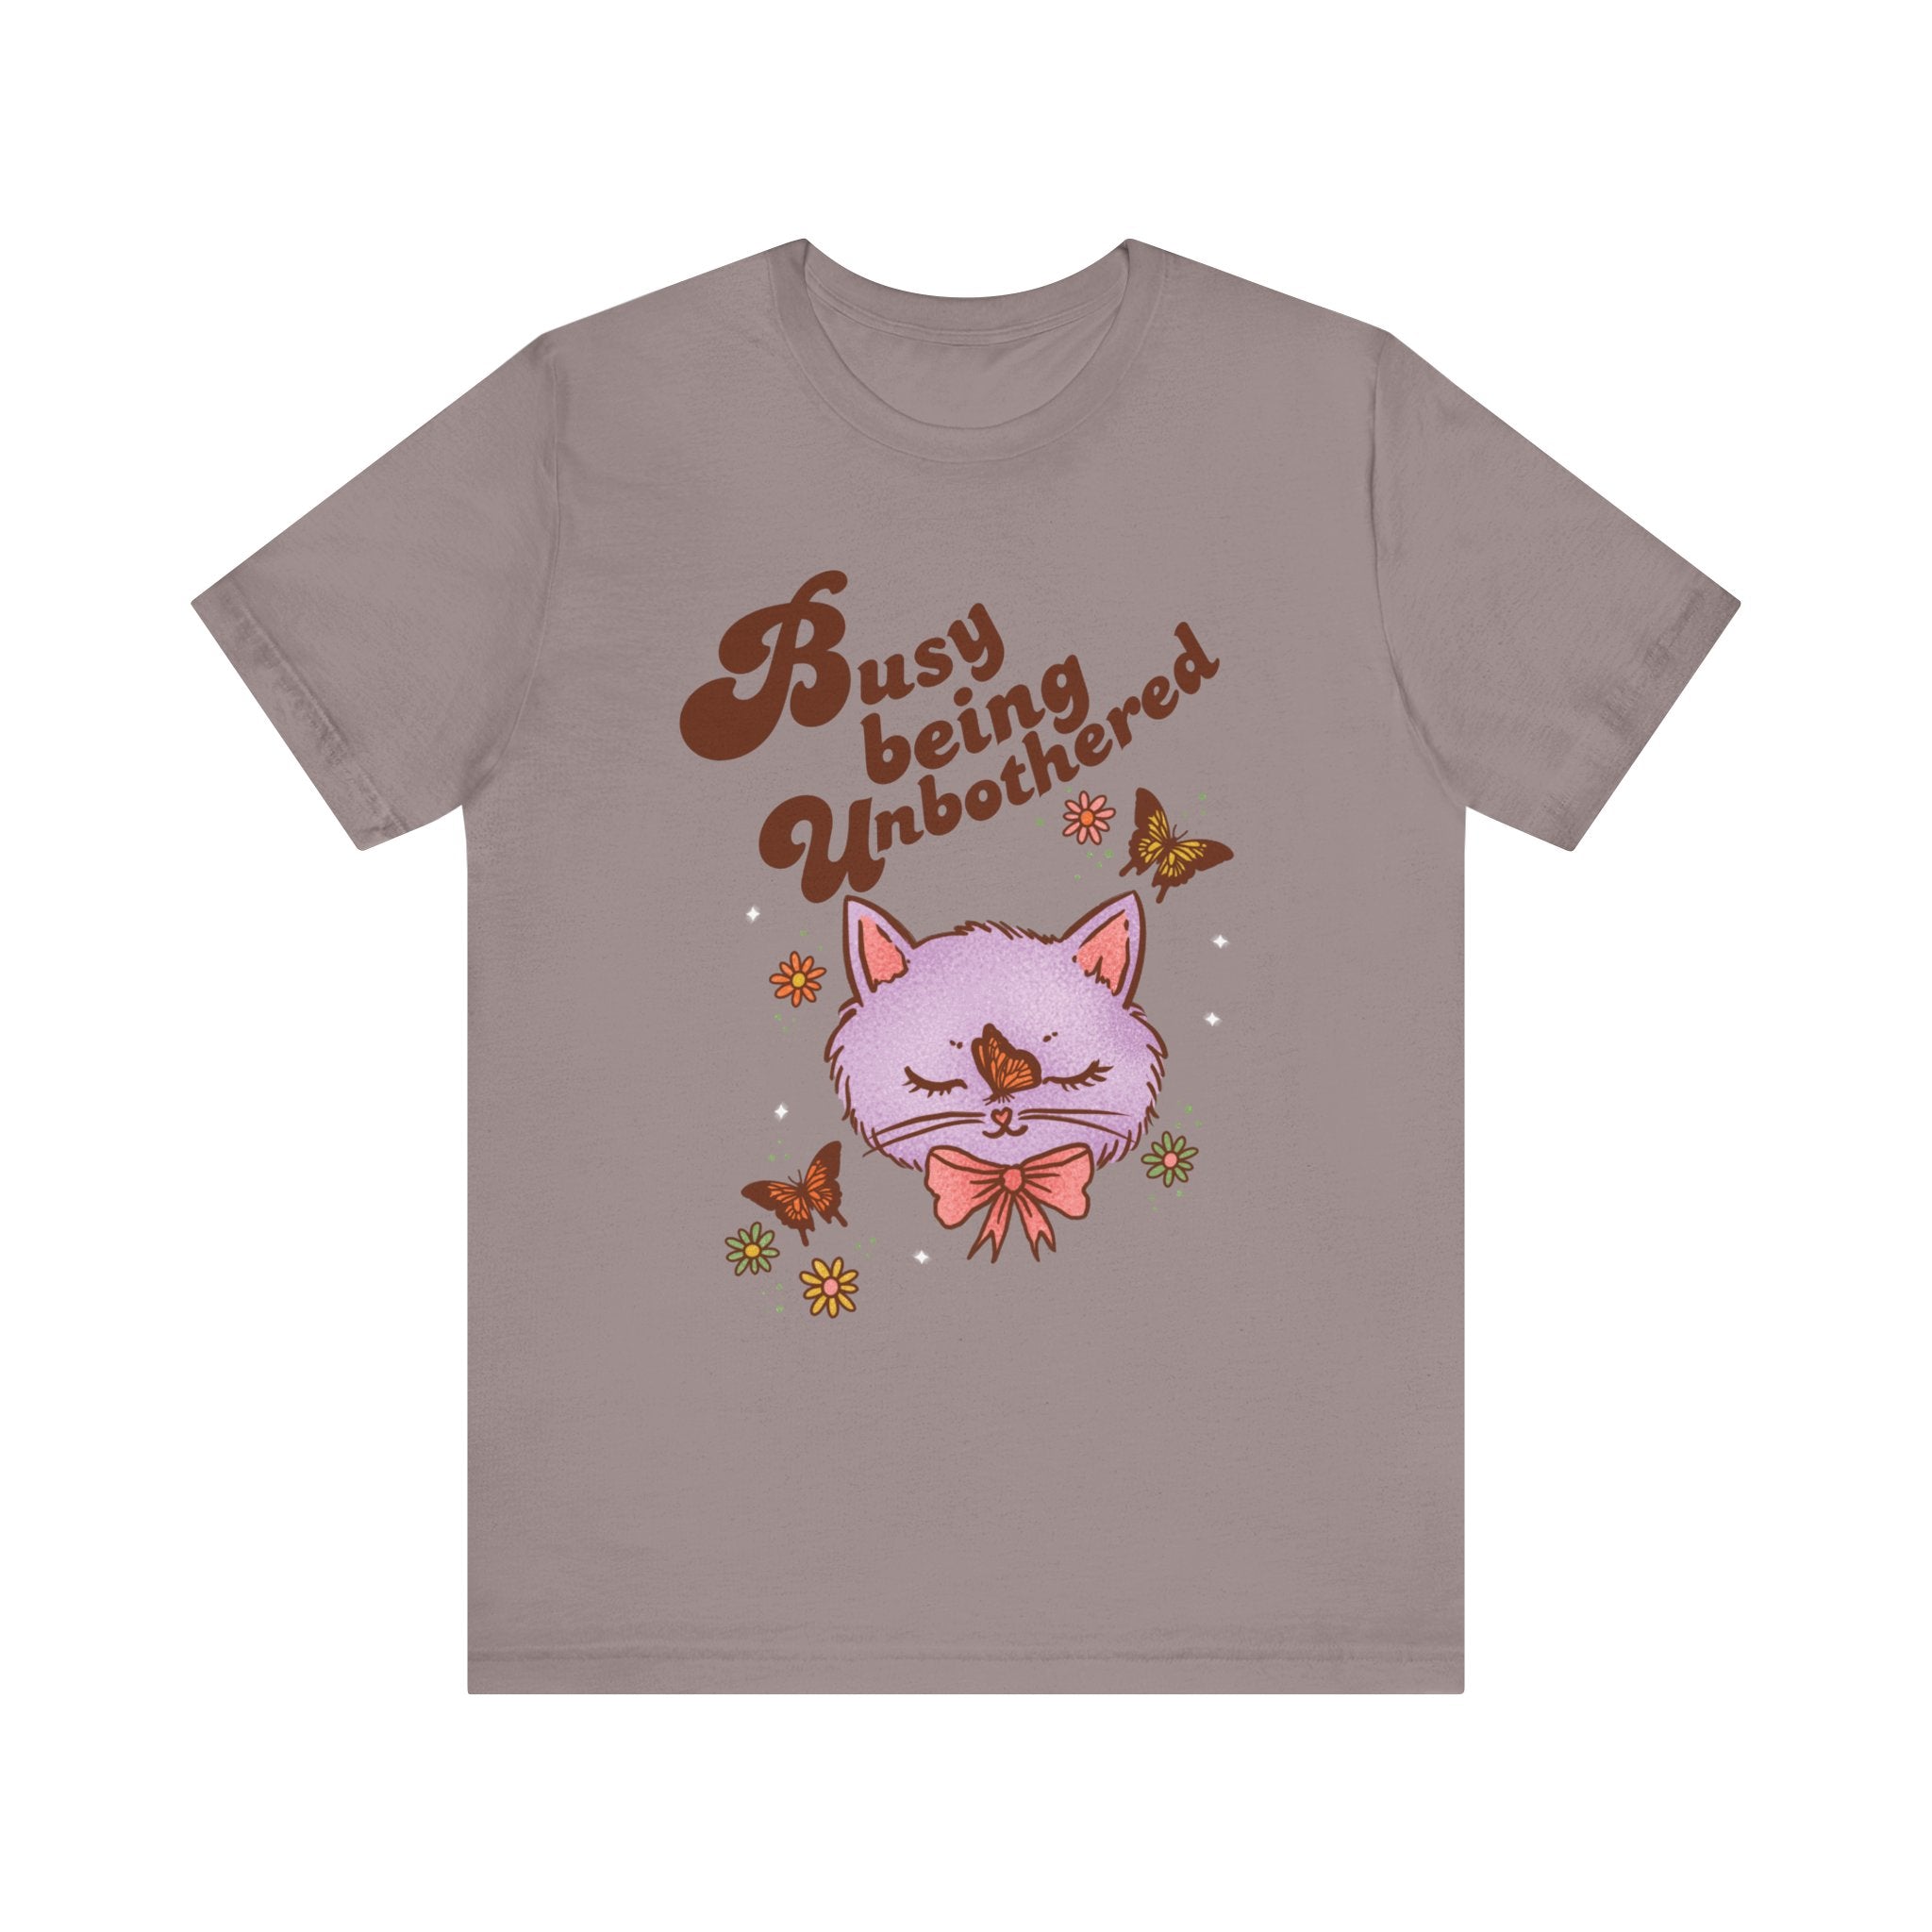 Unbothered Cat Tee